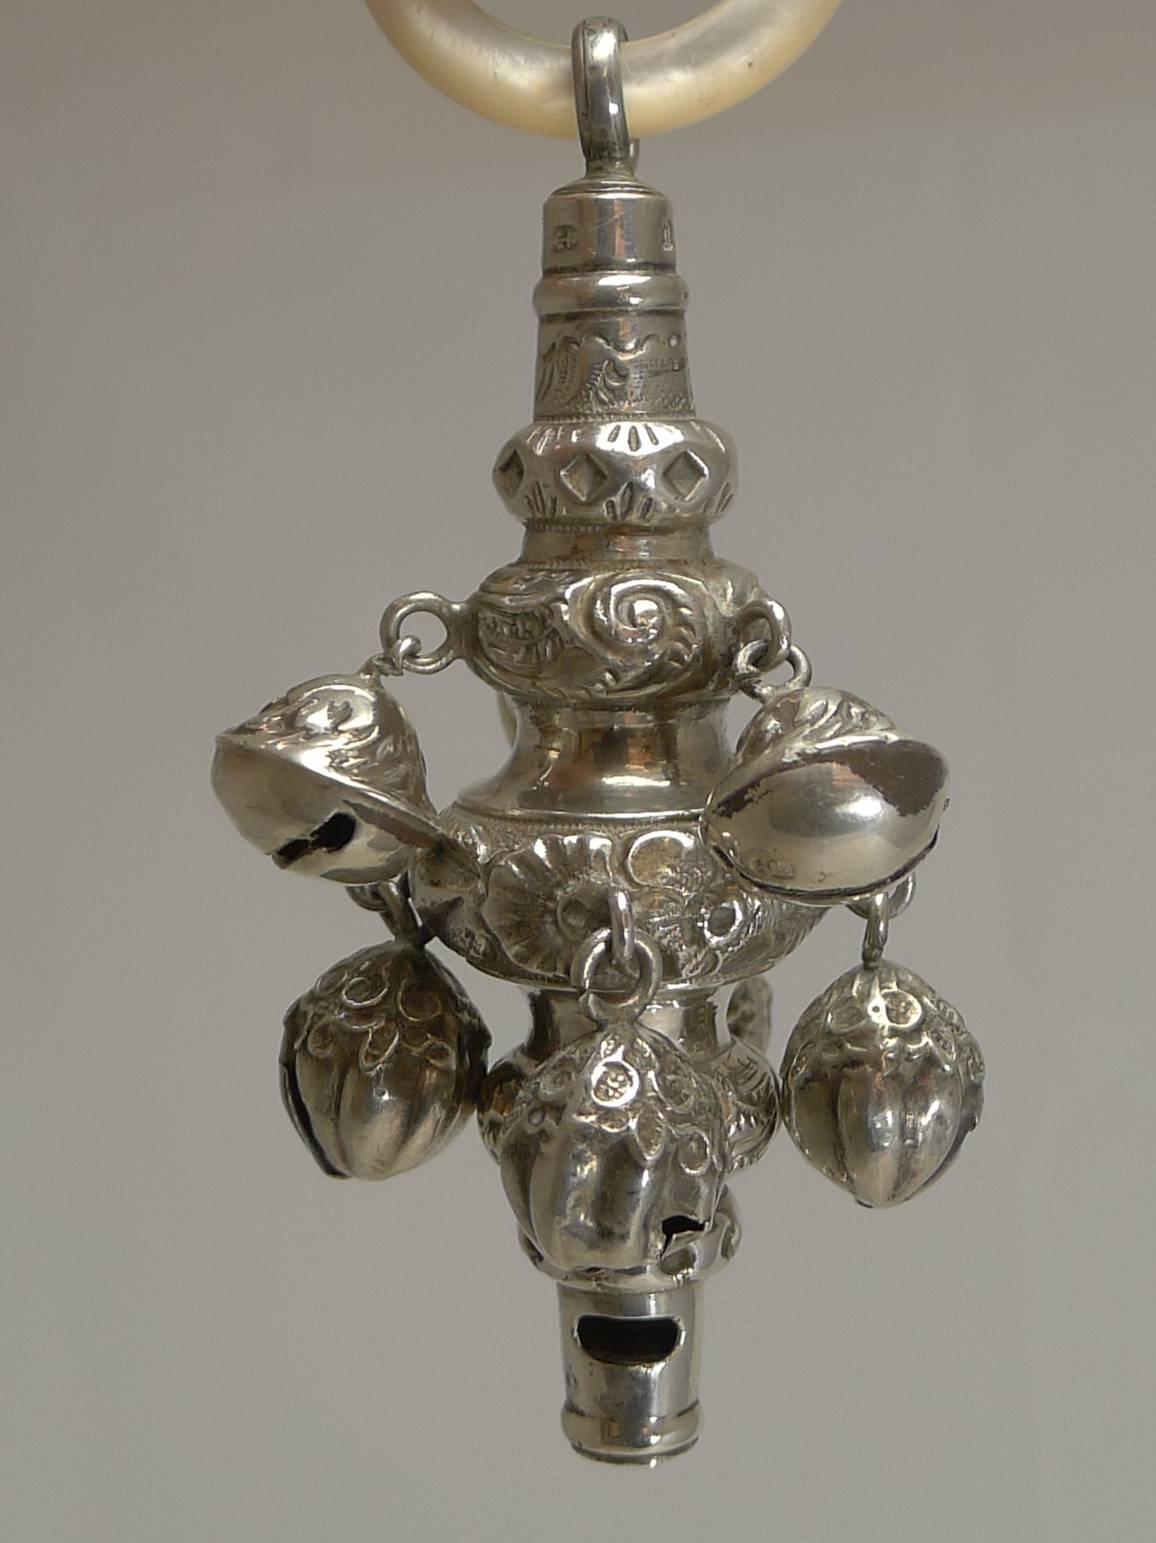 A beautiful English Victorian combined baby's rattle with an integral whistle, having eight bells and a mother-of-pearl teething ring.

All made from English sterling silver with repousse or embossed decoration and fully hallmarked for Birmingham